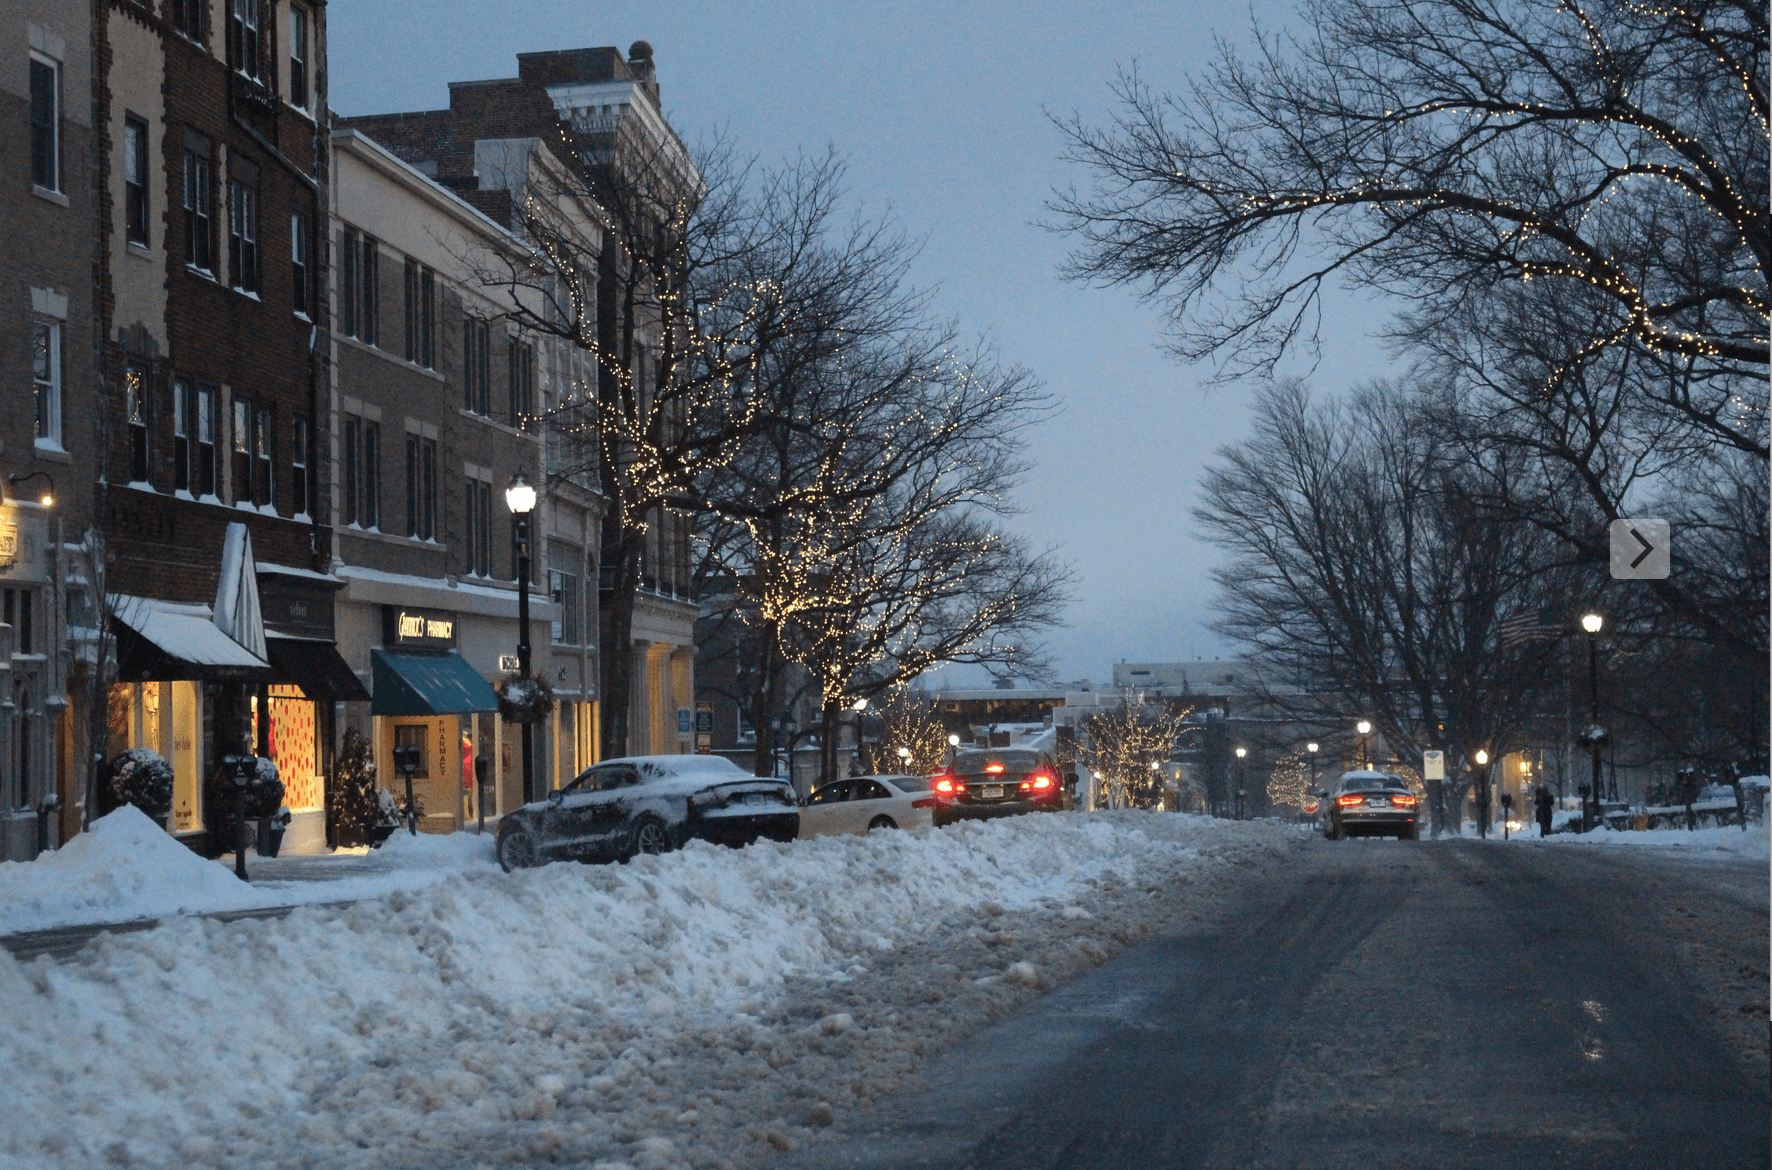 Greenwich Avenue at the tail end of the snow storm, Feb. 9, 2017